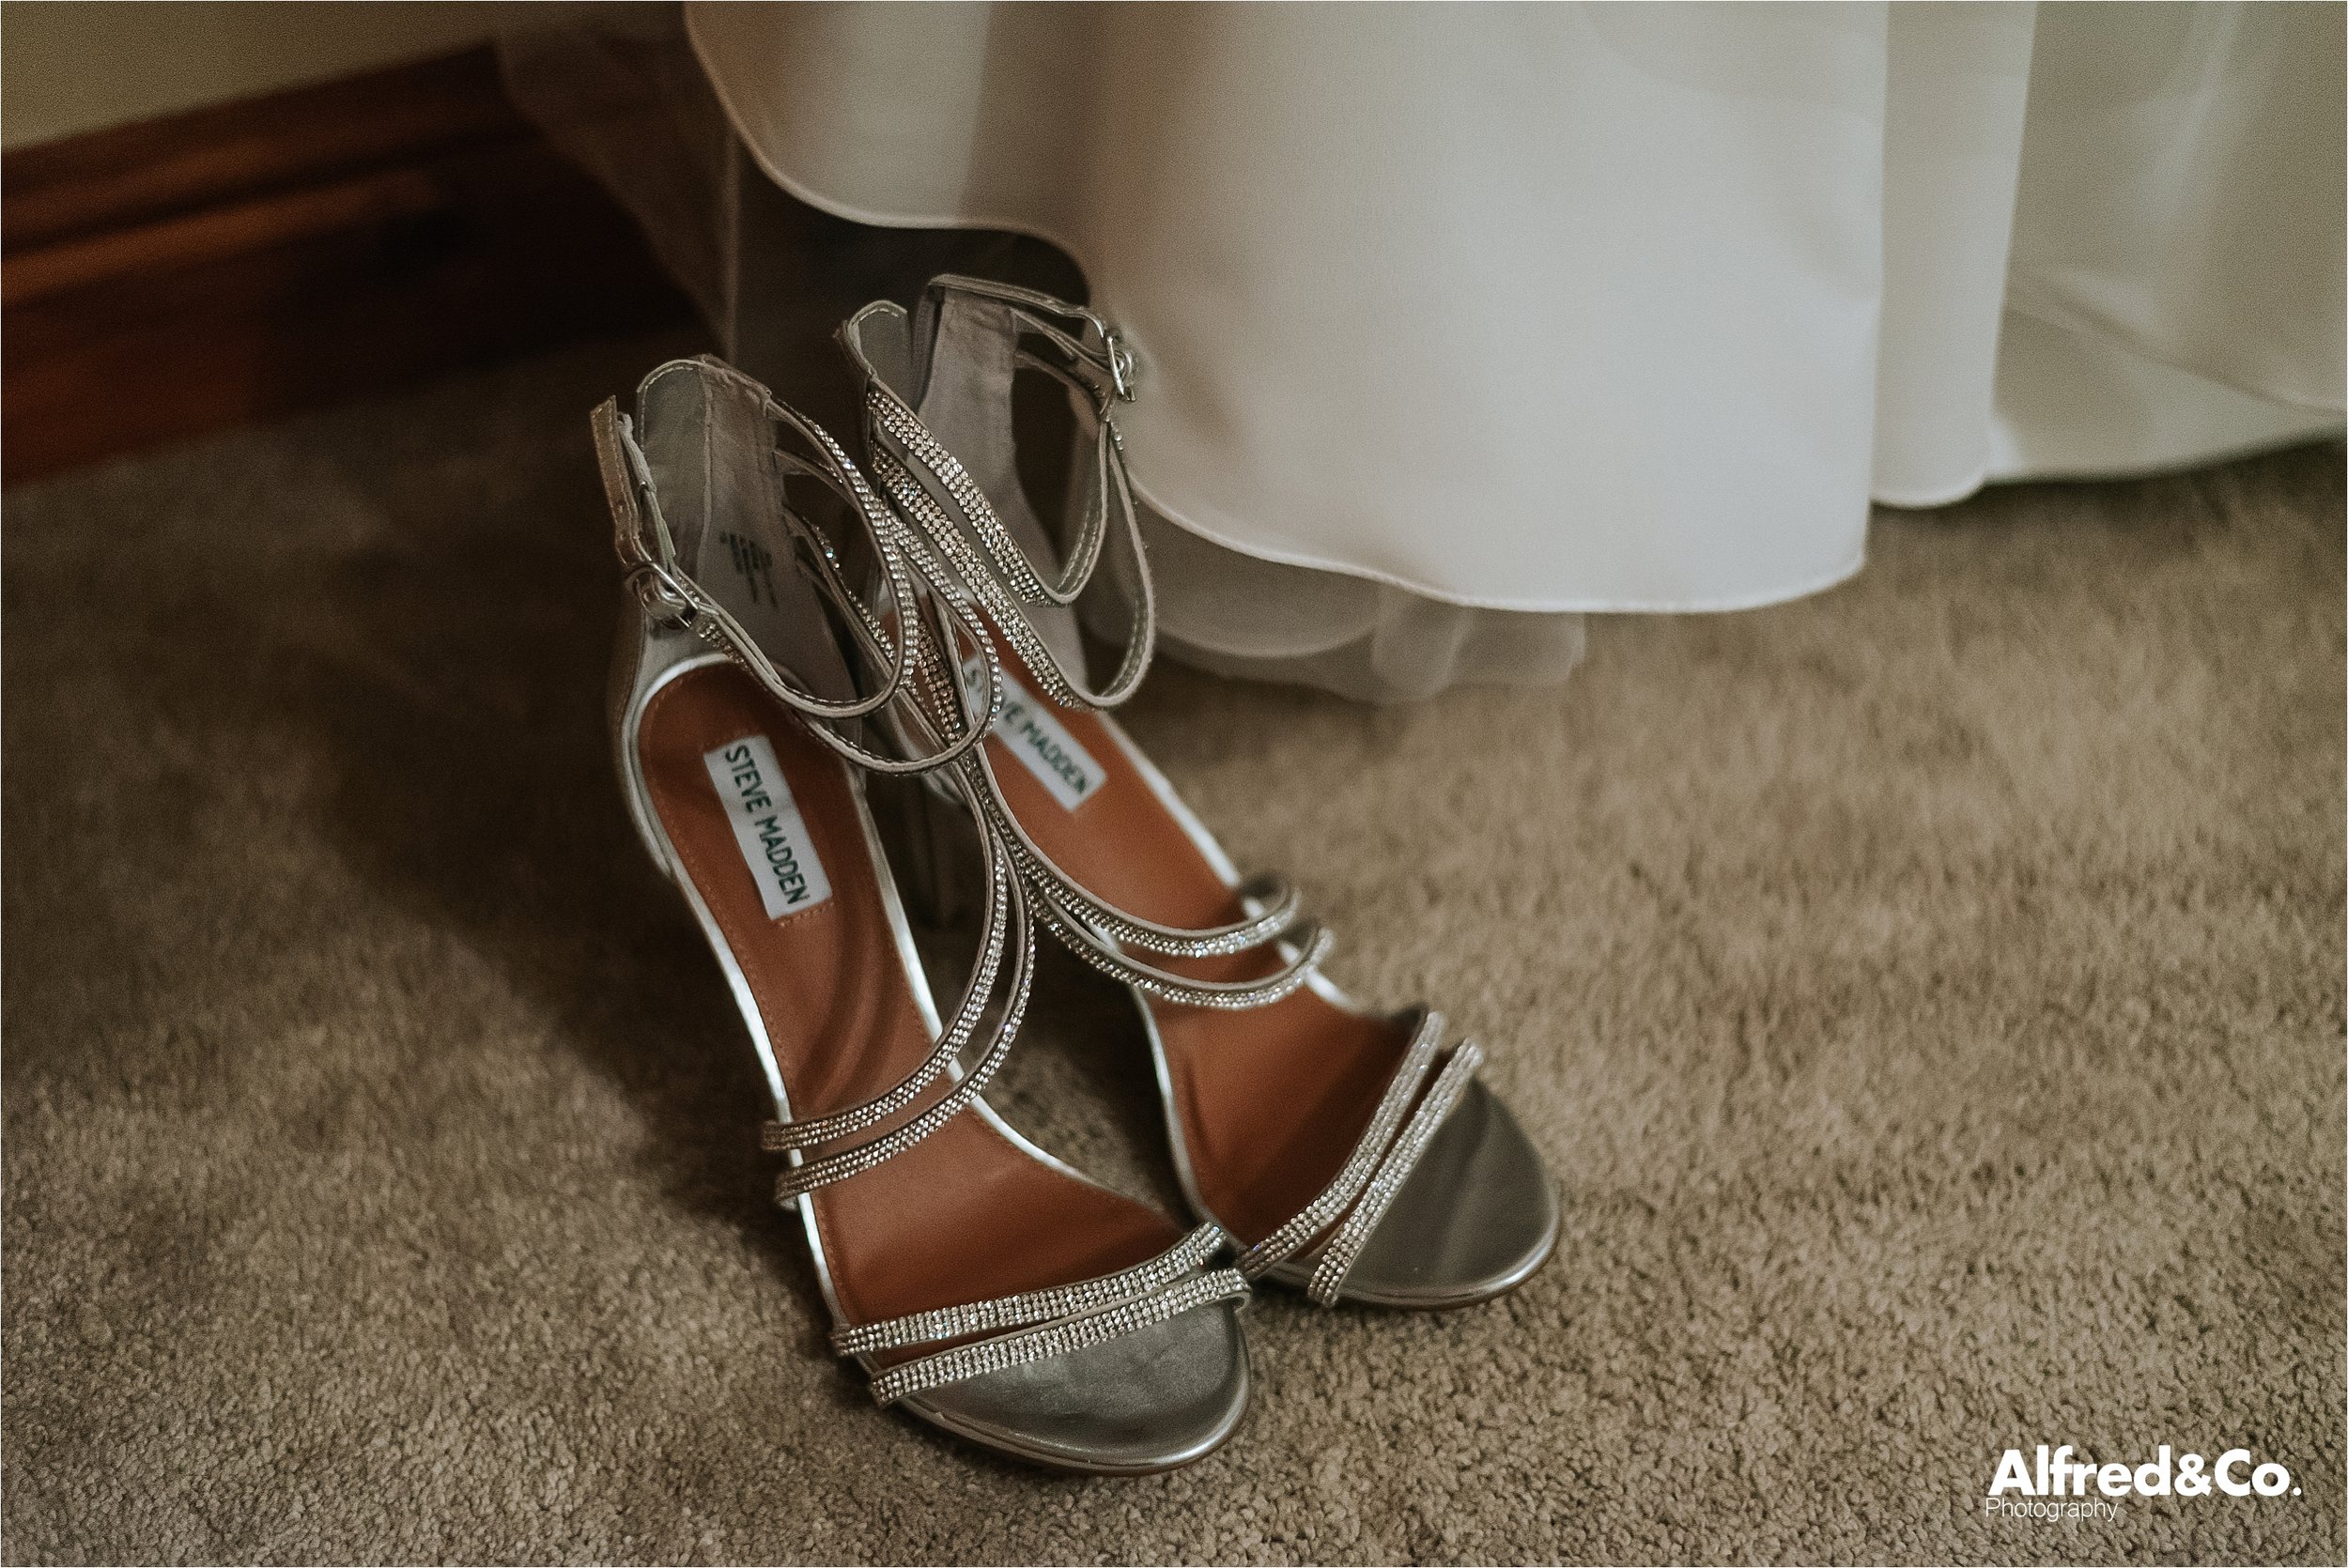 bridal shoes in room at beeston manor 